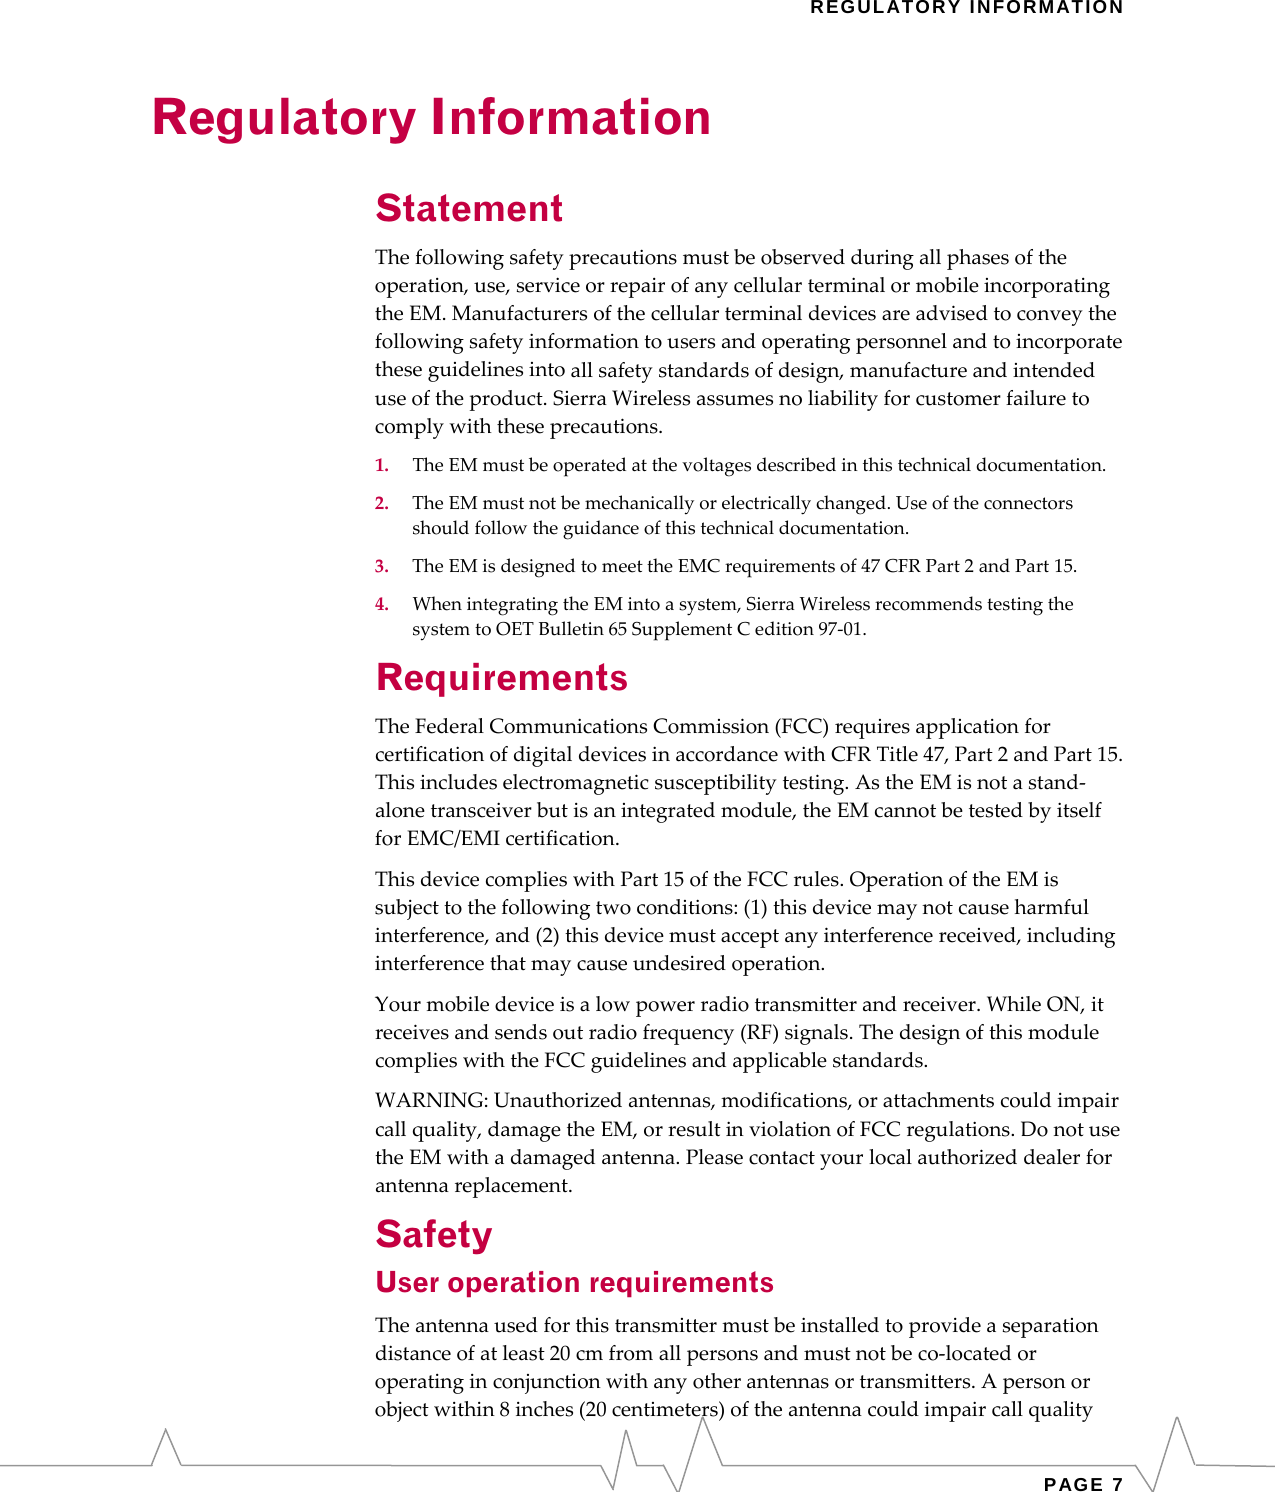   REGULATORY INFORMATION Regulatory Information Statement Thefollowingsafetyprecautionsmustbeobservedduringallphasesoftheoperation,use,serviceorrepairofanycellularterminalormobileincorporatingtheEM.Manufacturersofthecellularterminaldevicesareadvisedtoconveythefollowingsafetyinformationtousersandoperatingpersonnelandtoincorporatetheseguidelinesintoallsafetystandardsofdesign,manufactureandintendeduseoftheproduct.SierraWirelessassumesnoliabilityforcustomerfailuretocomplywiththeseprecautions.1.TheEMmustbeoperatedatthevoltagesdescribedinthistechnicaldocumentation.2.TheEMmustnotbemechanicallyorelectricallychanged.Useoftheconnectorsshouldfollowtheguidanceofthistechnicaldocumentation.3.TheEMisdesignedtomeettheEMCrequirementsof47CFRPart2andPart15.4.WhenintegratingtheEMintoasystem,SierraWirelessrecommendstestingthesystemtoOETBulletin65SupplementCedition97‐01.Requirements TheFederalCommunicationsCommission(FCC)requiresapplicationforcertificationofdigitaldevicesinaccordancewithCFRTitle47,Part2andPart15.Thisincludeselectromagneticsusceptibilitytesting.AstheEMisnotastand‐alonetransceiverbutisanintegratedmodule,theEMcannotbetestedbyitselfforEMC/EMIcertification.ThisdevicecomplieswithPart15oftheFCCrules.OperationoftheEMissubjecttothefollowingtwoconditions:(1)thisdevicemaynotcauseharmfulinterference,and(2)thisdevicemustacceptanyinterferencereceived,includinginterferencethatmaycauseundesiredoperation.Yourmobiledeviceisalowpowerradiotransmitterandreceiver.WhileON,itreceivesandsendsoutradiofrequency(RF)signals.ThedesignofthismodulecomplieswiththeFCCguidelinesandapplicablestandards.WARNING:Unauthorizedantennas,modifications,orattachmentscouldimpaircallquality,damagetheEM,orresultinviolationofFCCregulations.DonotusetheEMwithadamagedantenna.Pleasecontactyourlocalauthorizeddealerforantennareplacement.Safety User operation requirements Theantennausedforthistransmittermustbeinstalledtoprovideaseparationdistanceofatleast20cmfromallpersonsandmustnotbeco‐locatedoroperatinginconjunctionwithanyotherantennasortransmitters.Apersonorobjectwithin8inches(20centimeters)oftheantennacouldimpaircallquality PAGE 7 